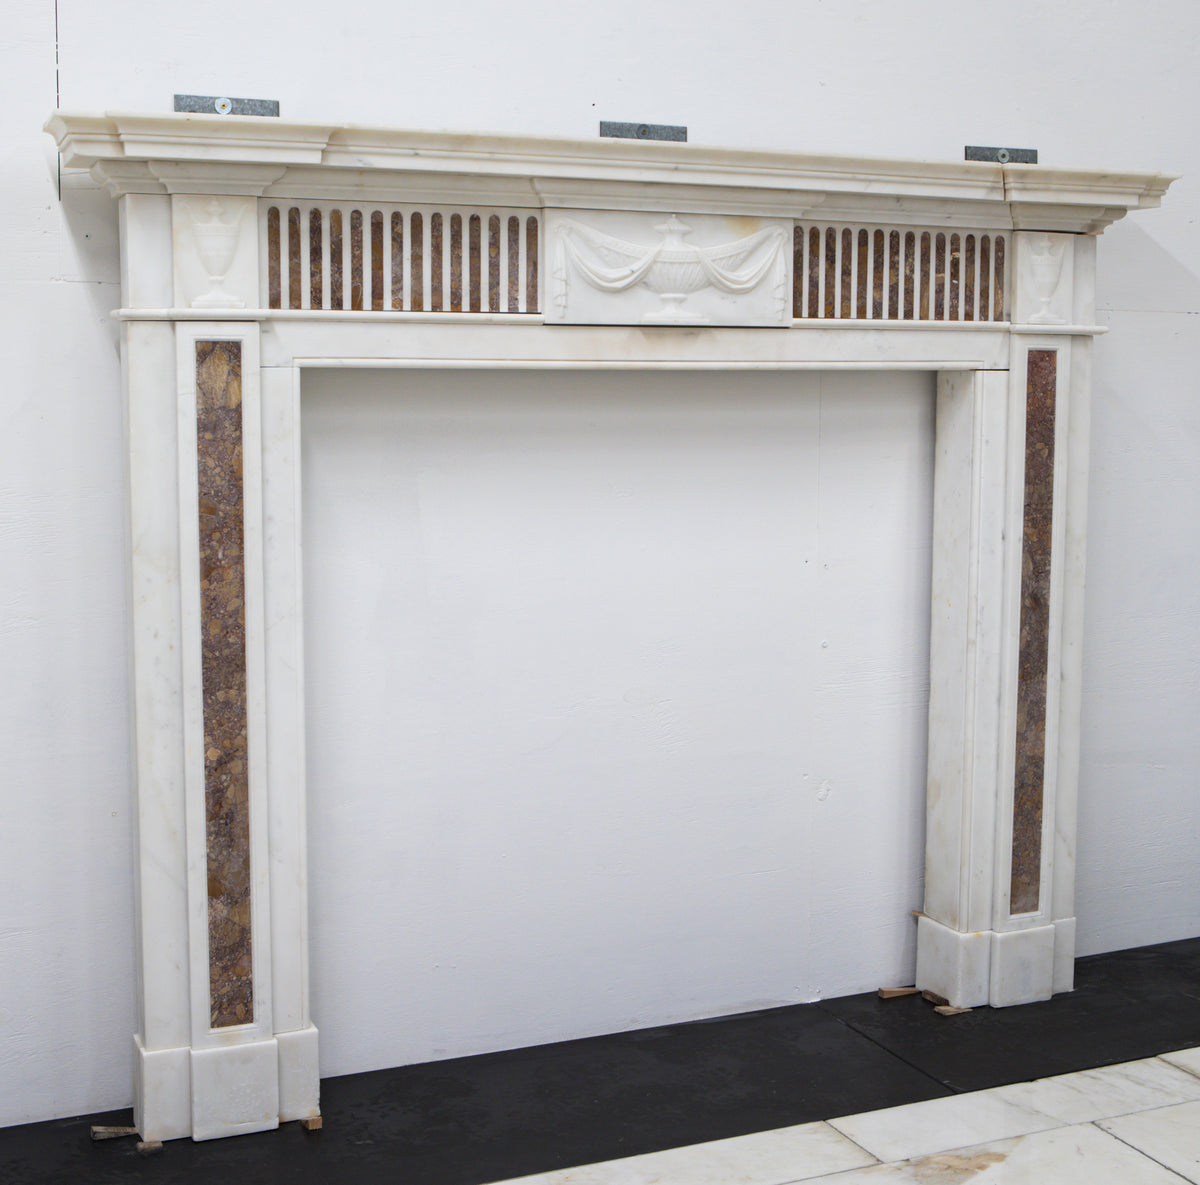 Marble Antique Late Georgian Statuary and Spanish Brocatello Inlay Chimneypiece c.1790 | The Architectural Forum